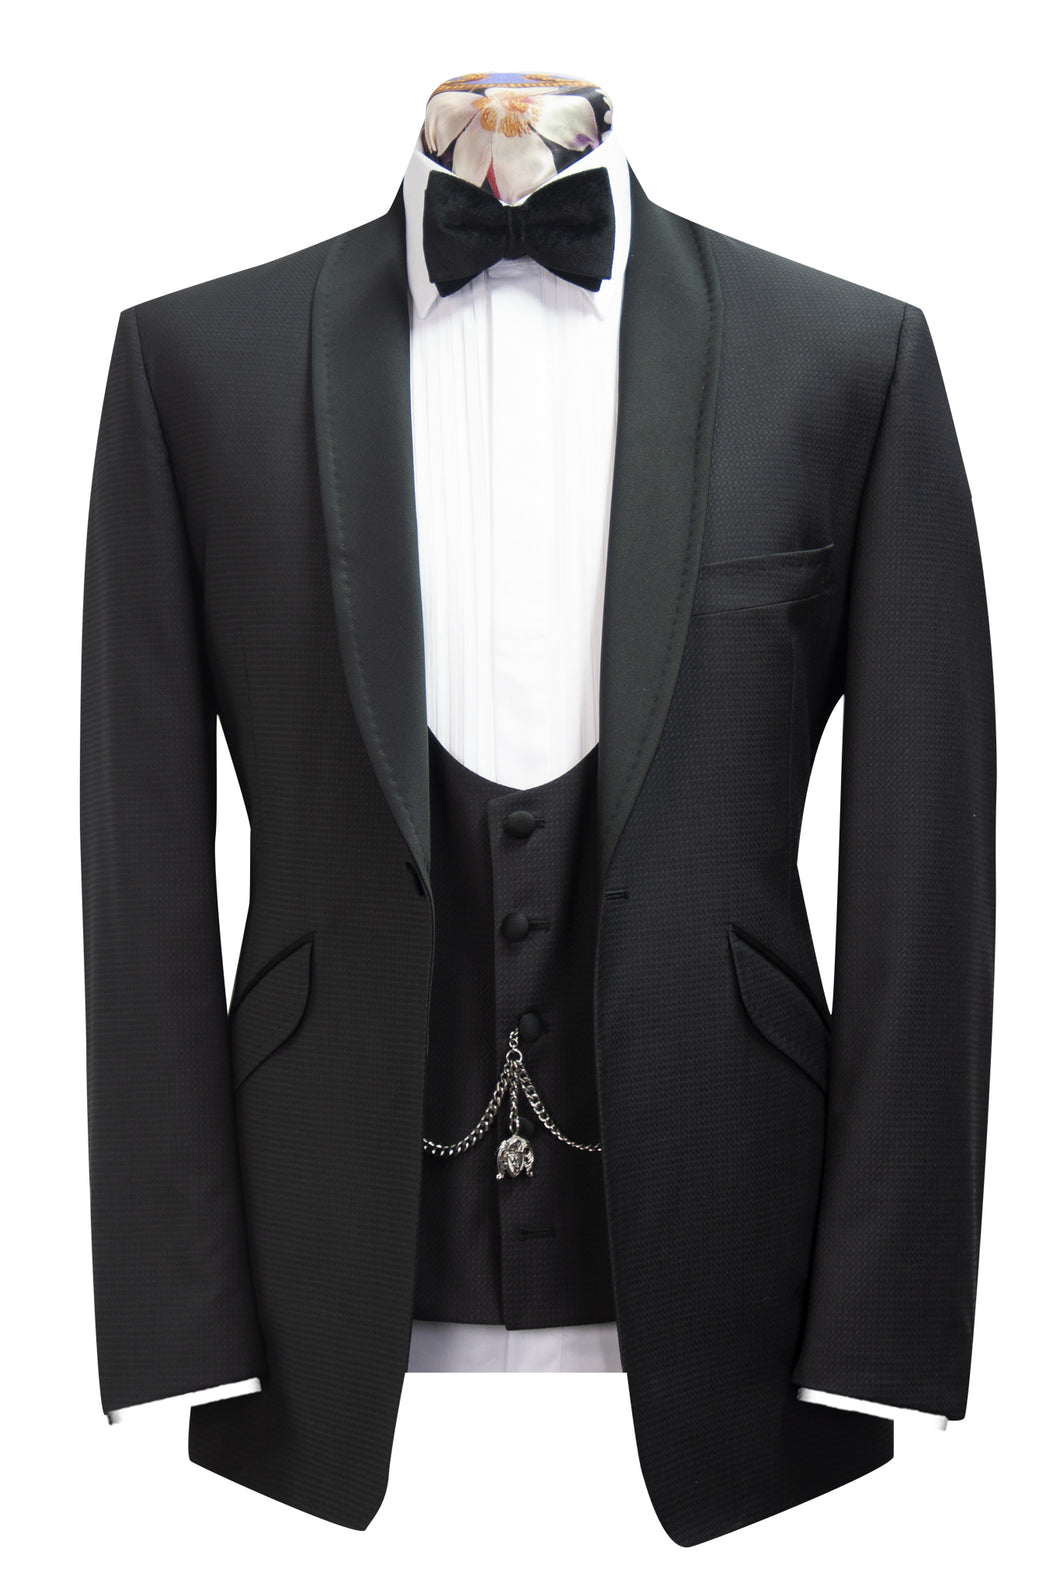 The Black Benedict Classic Suit with Square Weave